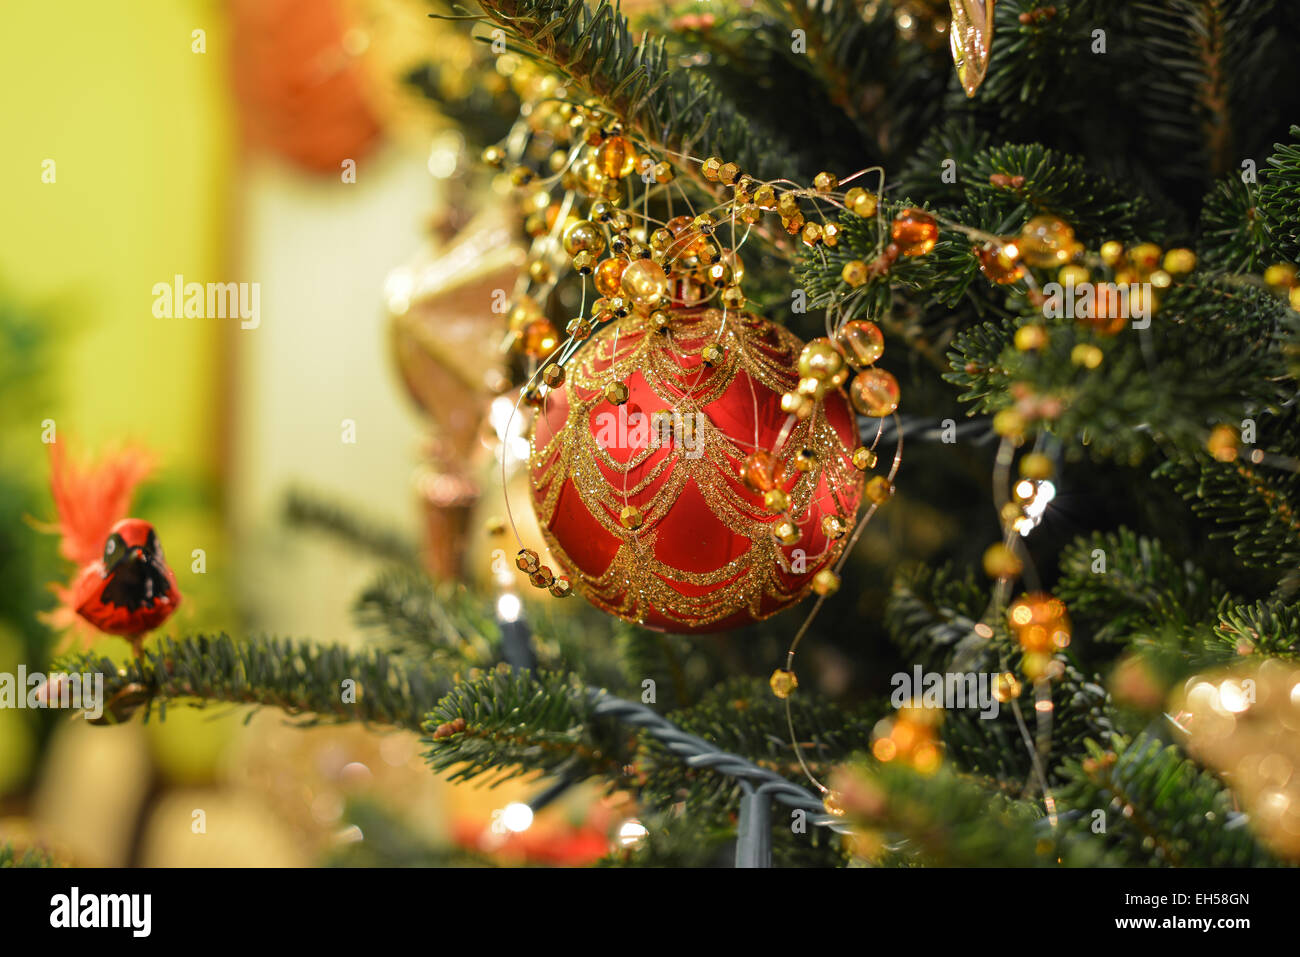 Christmas tree decoration in red- square image with shallow dof Stock Photo